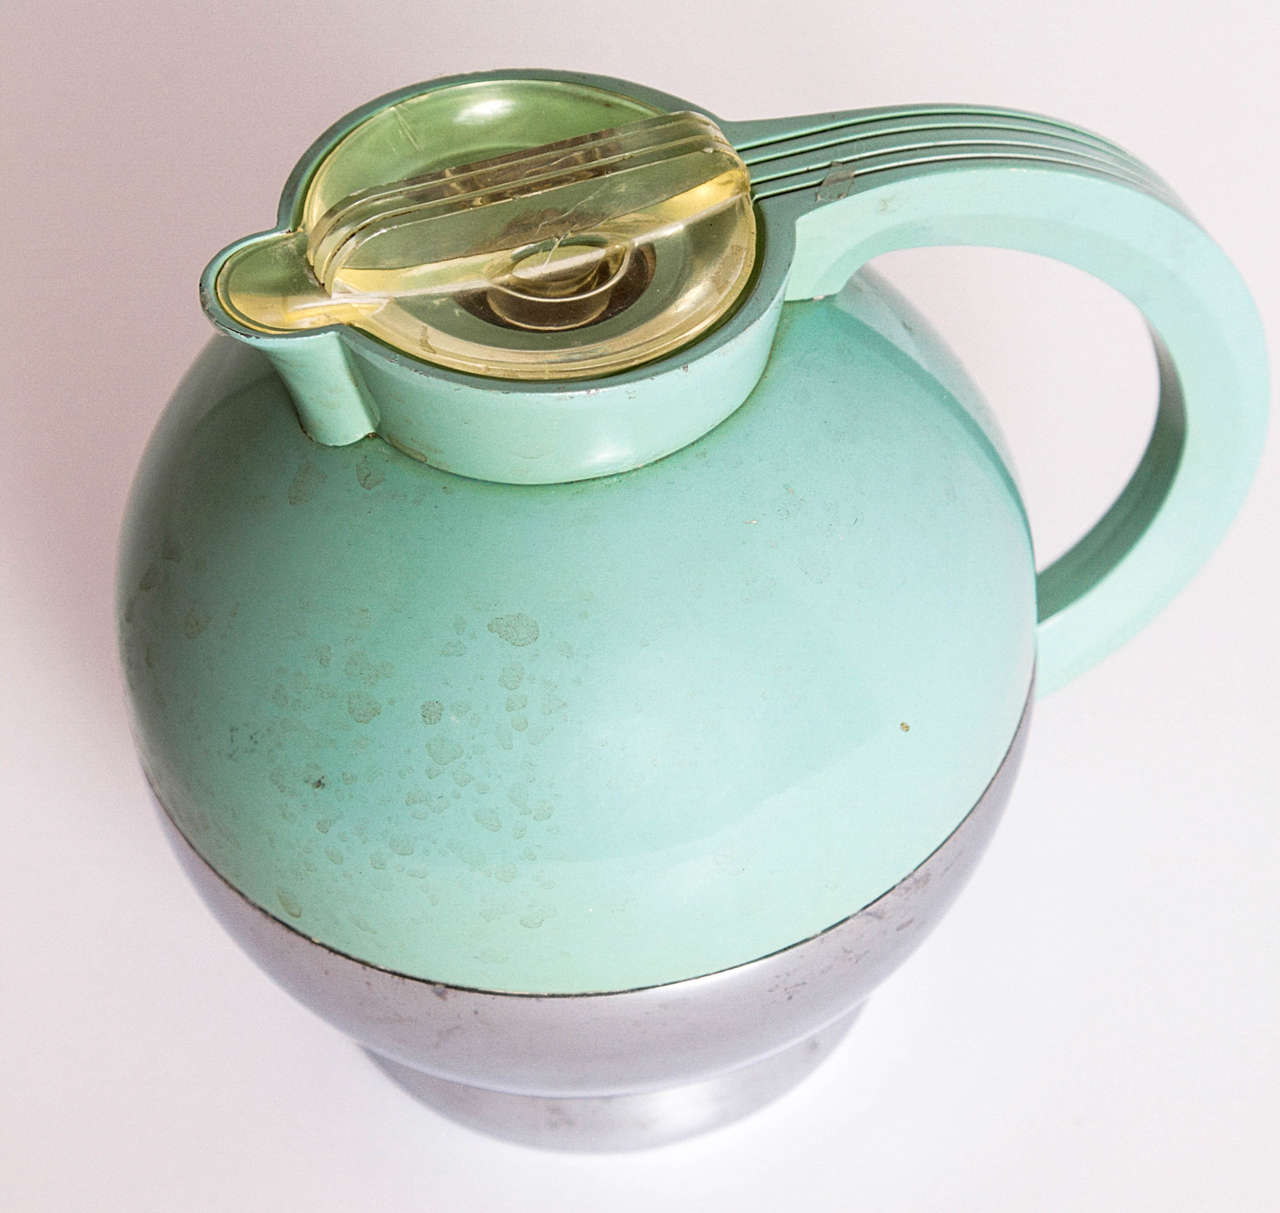 Uncommon Vintage Modernist Signed Thermos Pitcher with Original Tray In Good Condition For Sale In Dallas, TX